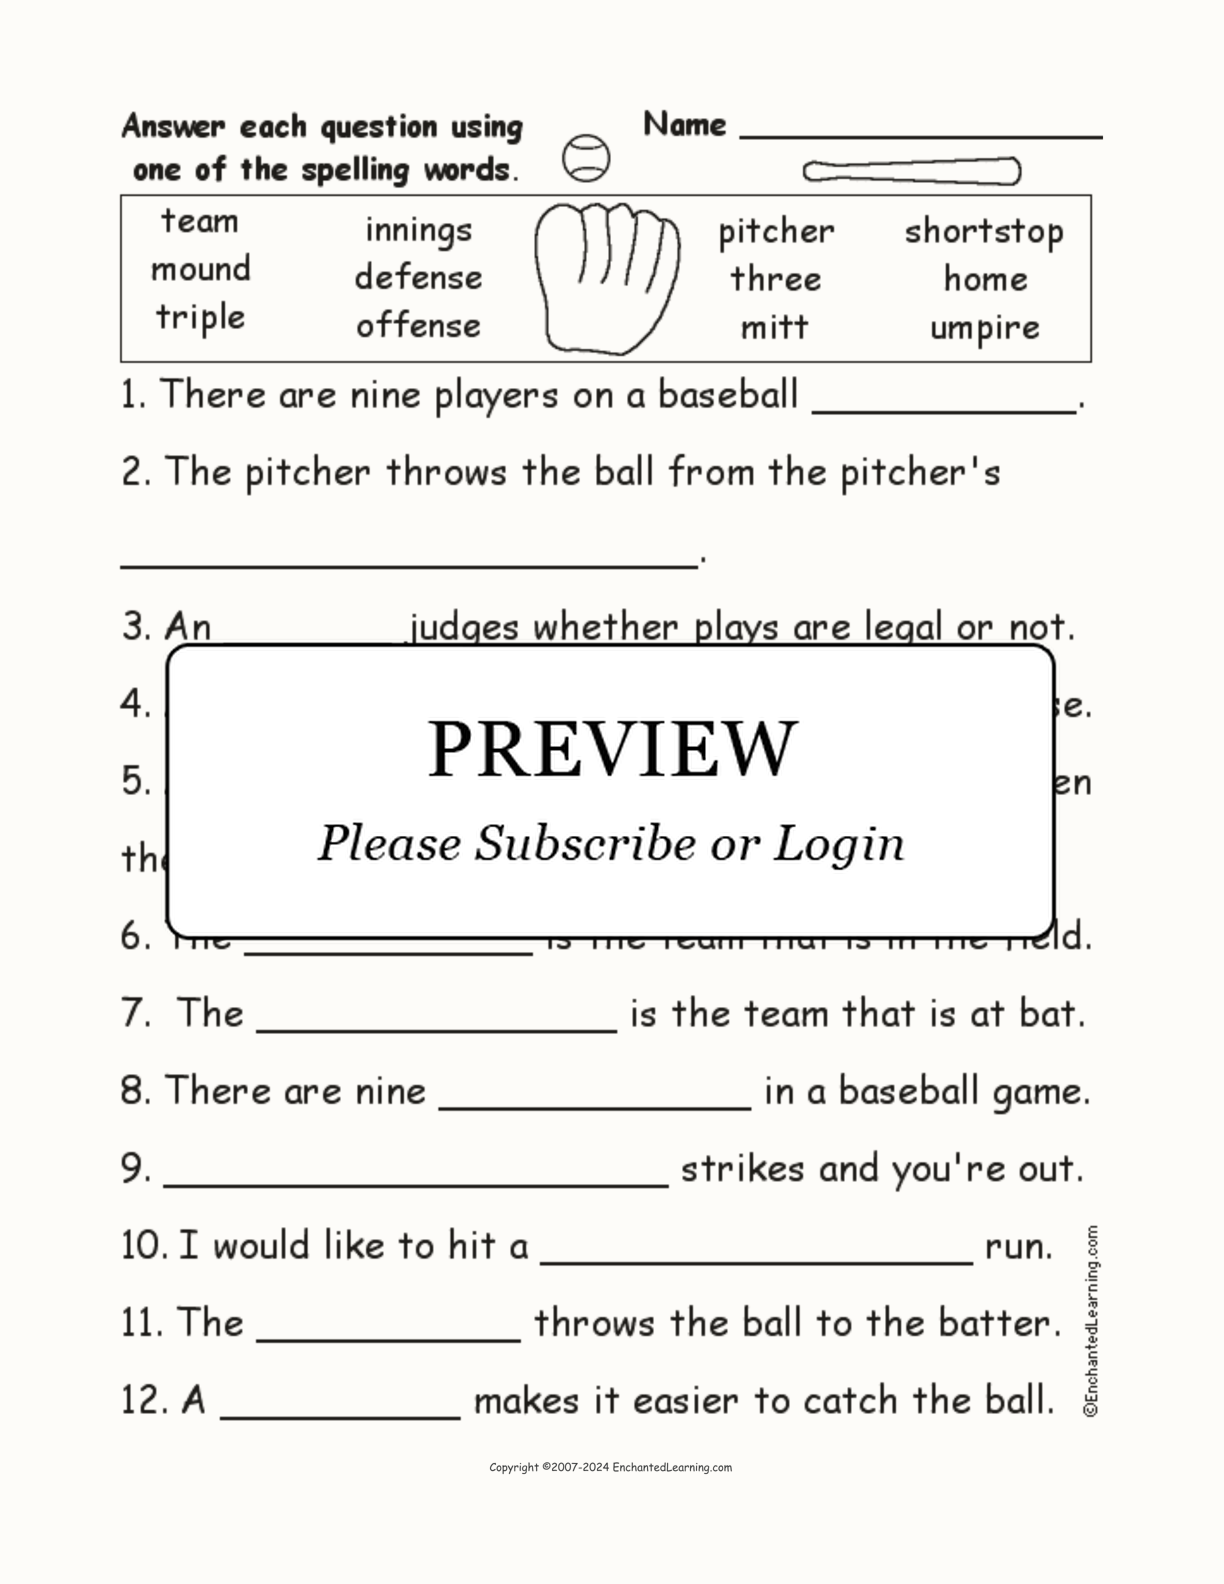 Baseball Spelling Word Questions interactive worksheet page 1